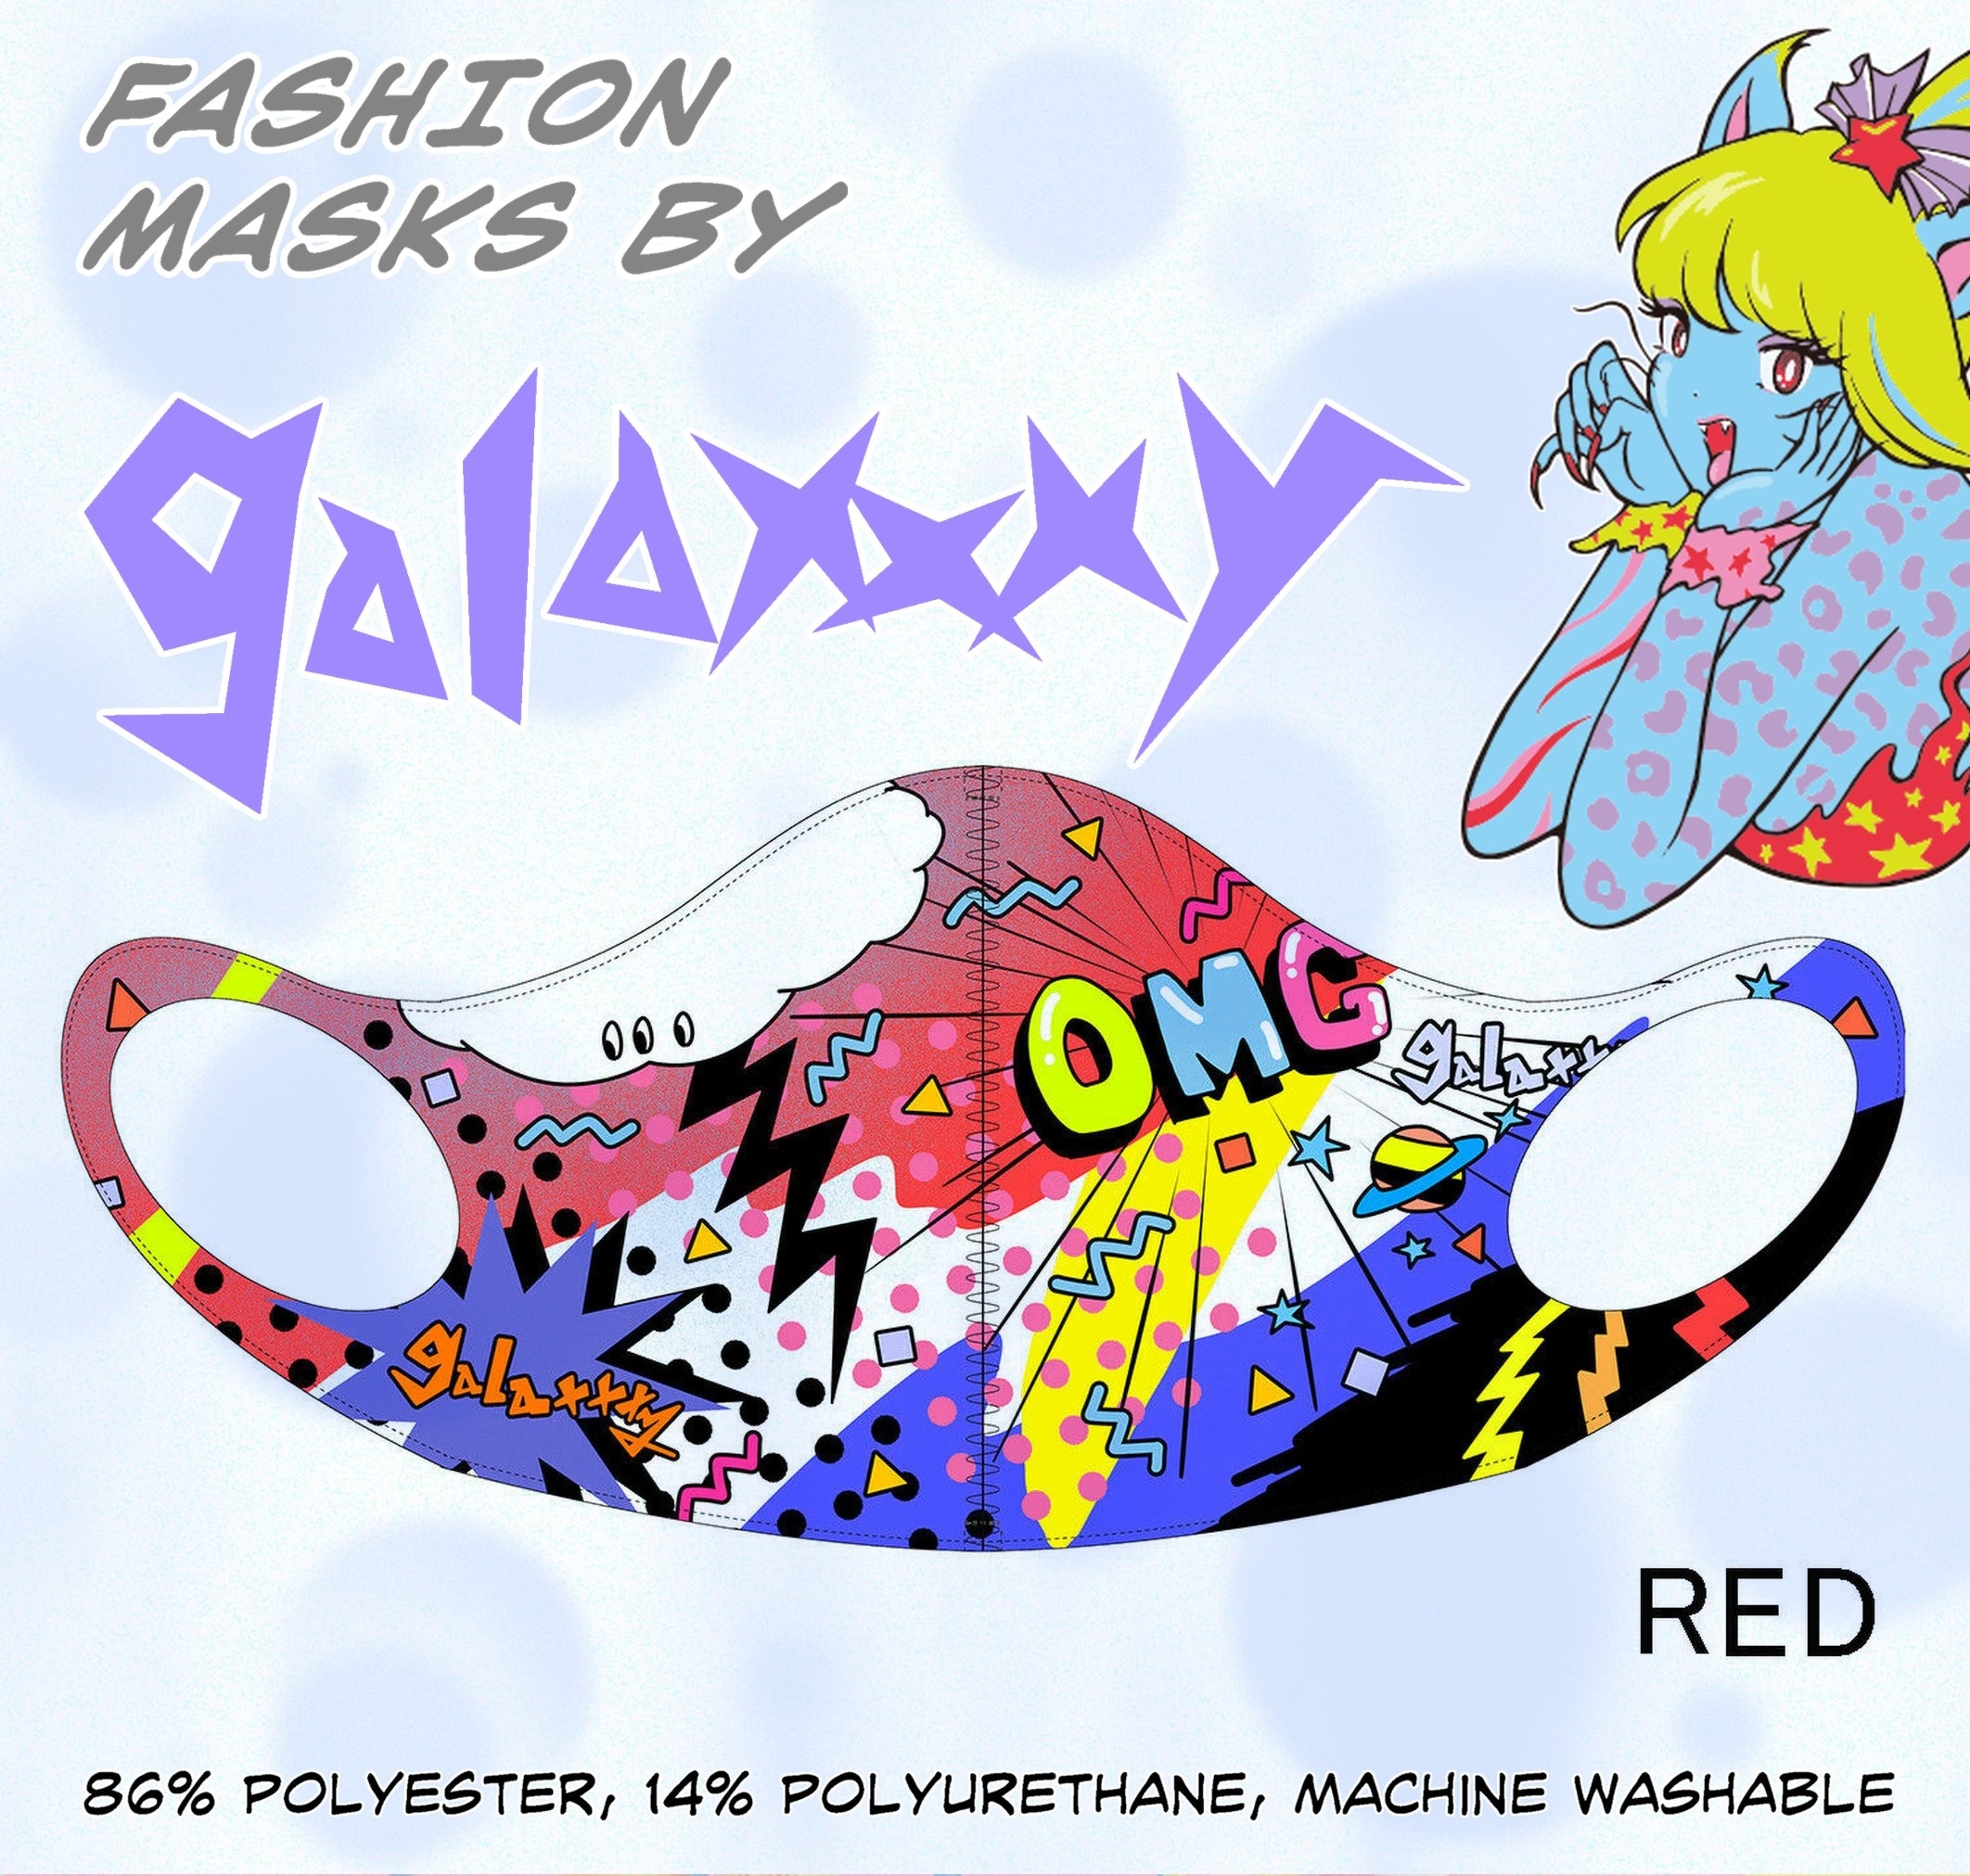 RED Fashion Mask by galaxxxy